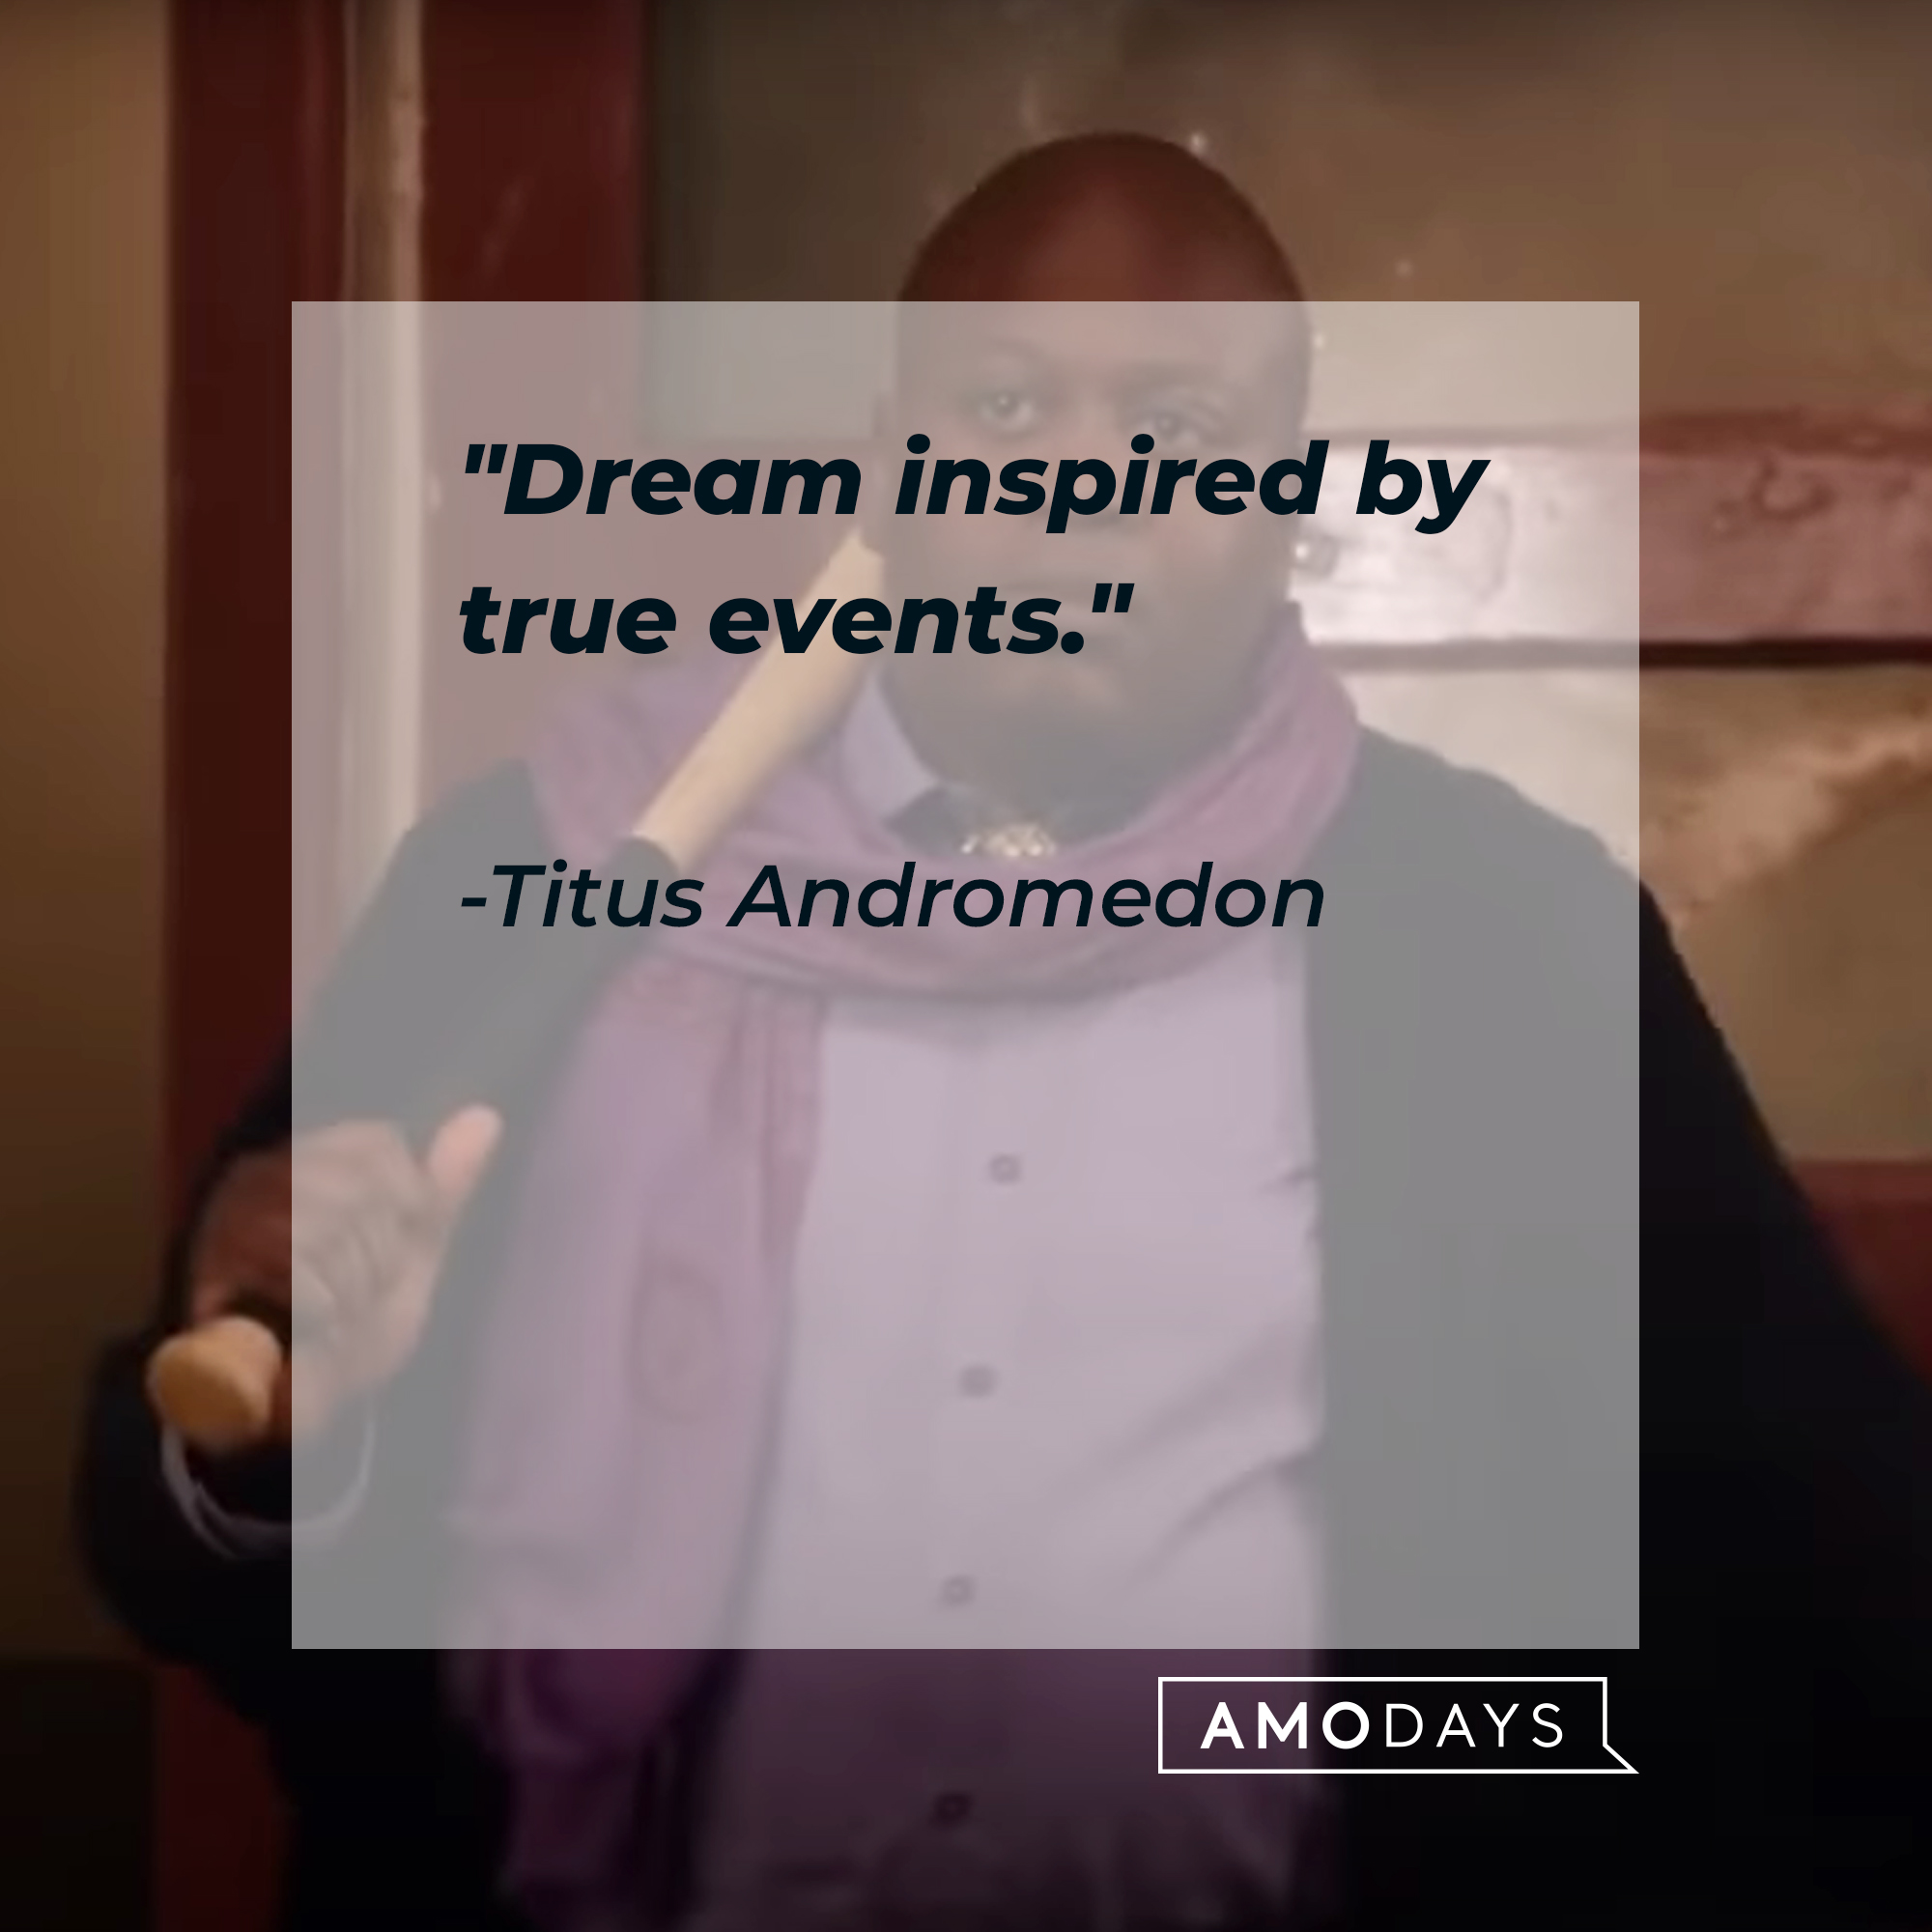 A photo of Titus Andromedon with the quote, "Dream inspired by true events" | Source: YouTube/Netflix